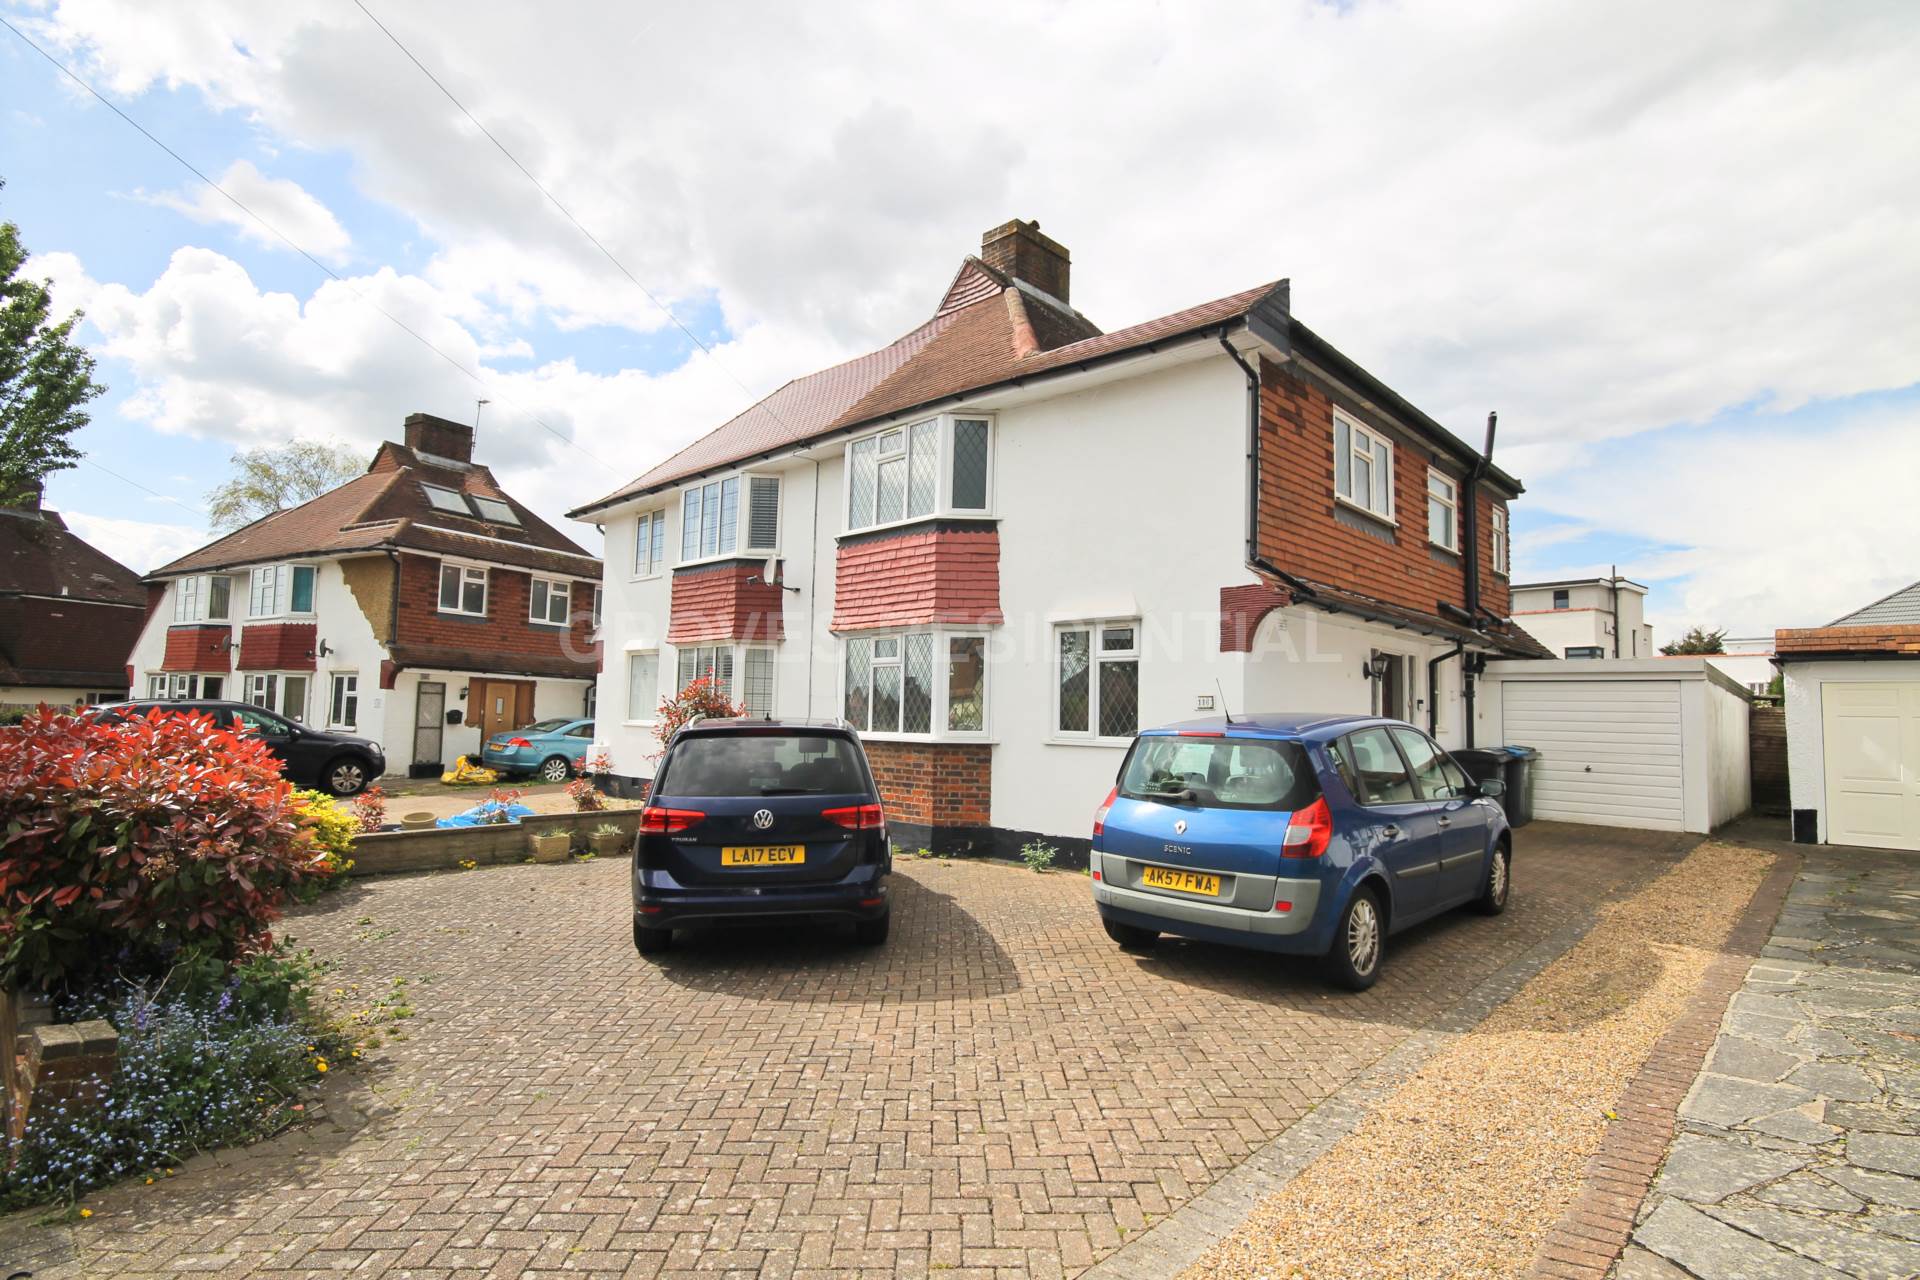 3 bed Semi-Detached House for rent in New Malden. From Groves Residential